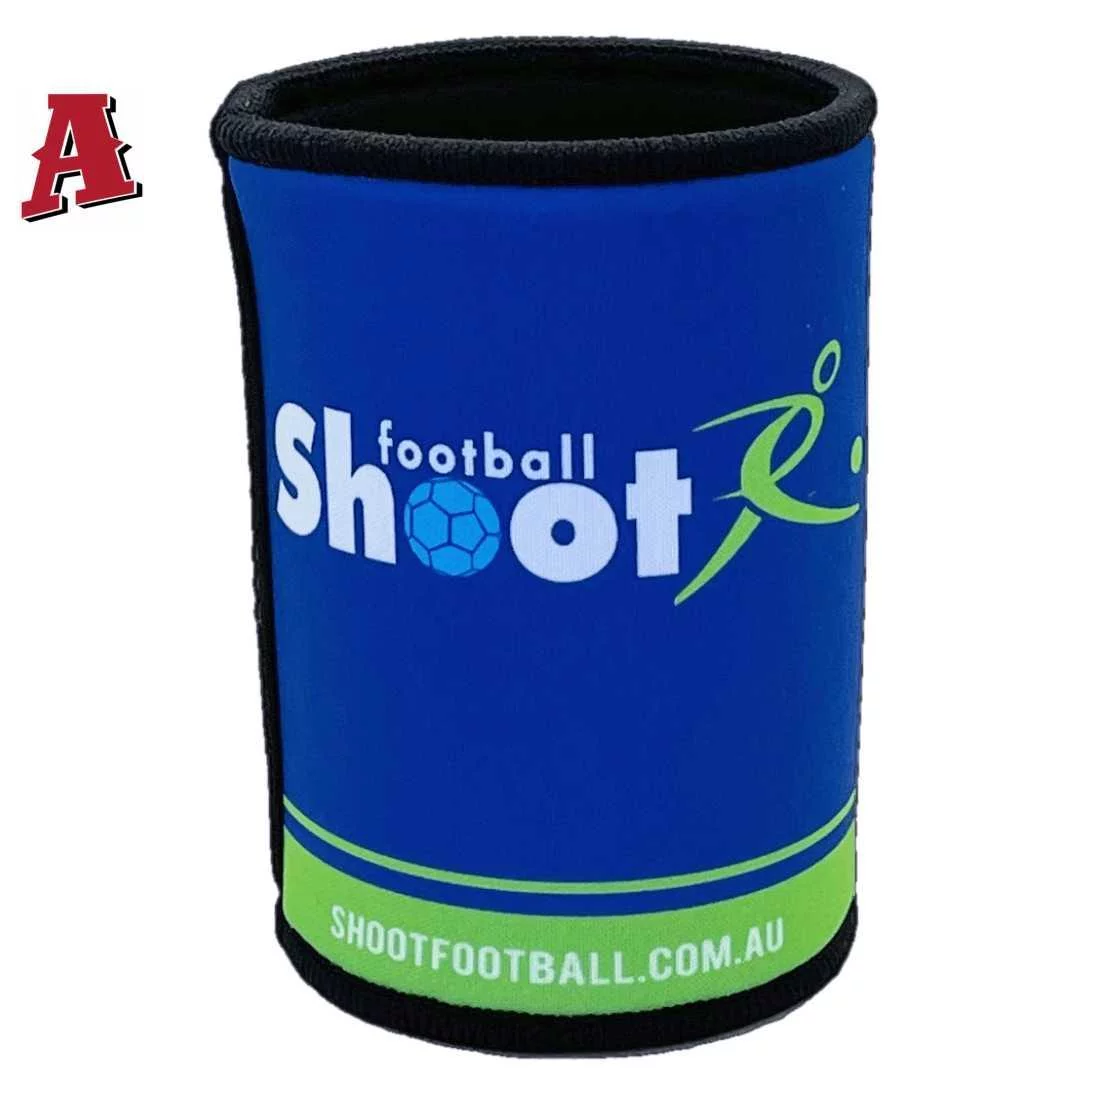 Shoot Football Port Macquarie NSW Aussie Custom Stubby Holders - Koozie - 5mm Premium Neoprene with Taped & Stitched Seams Royal Blue